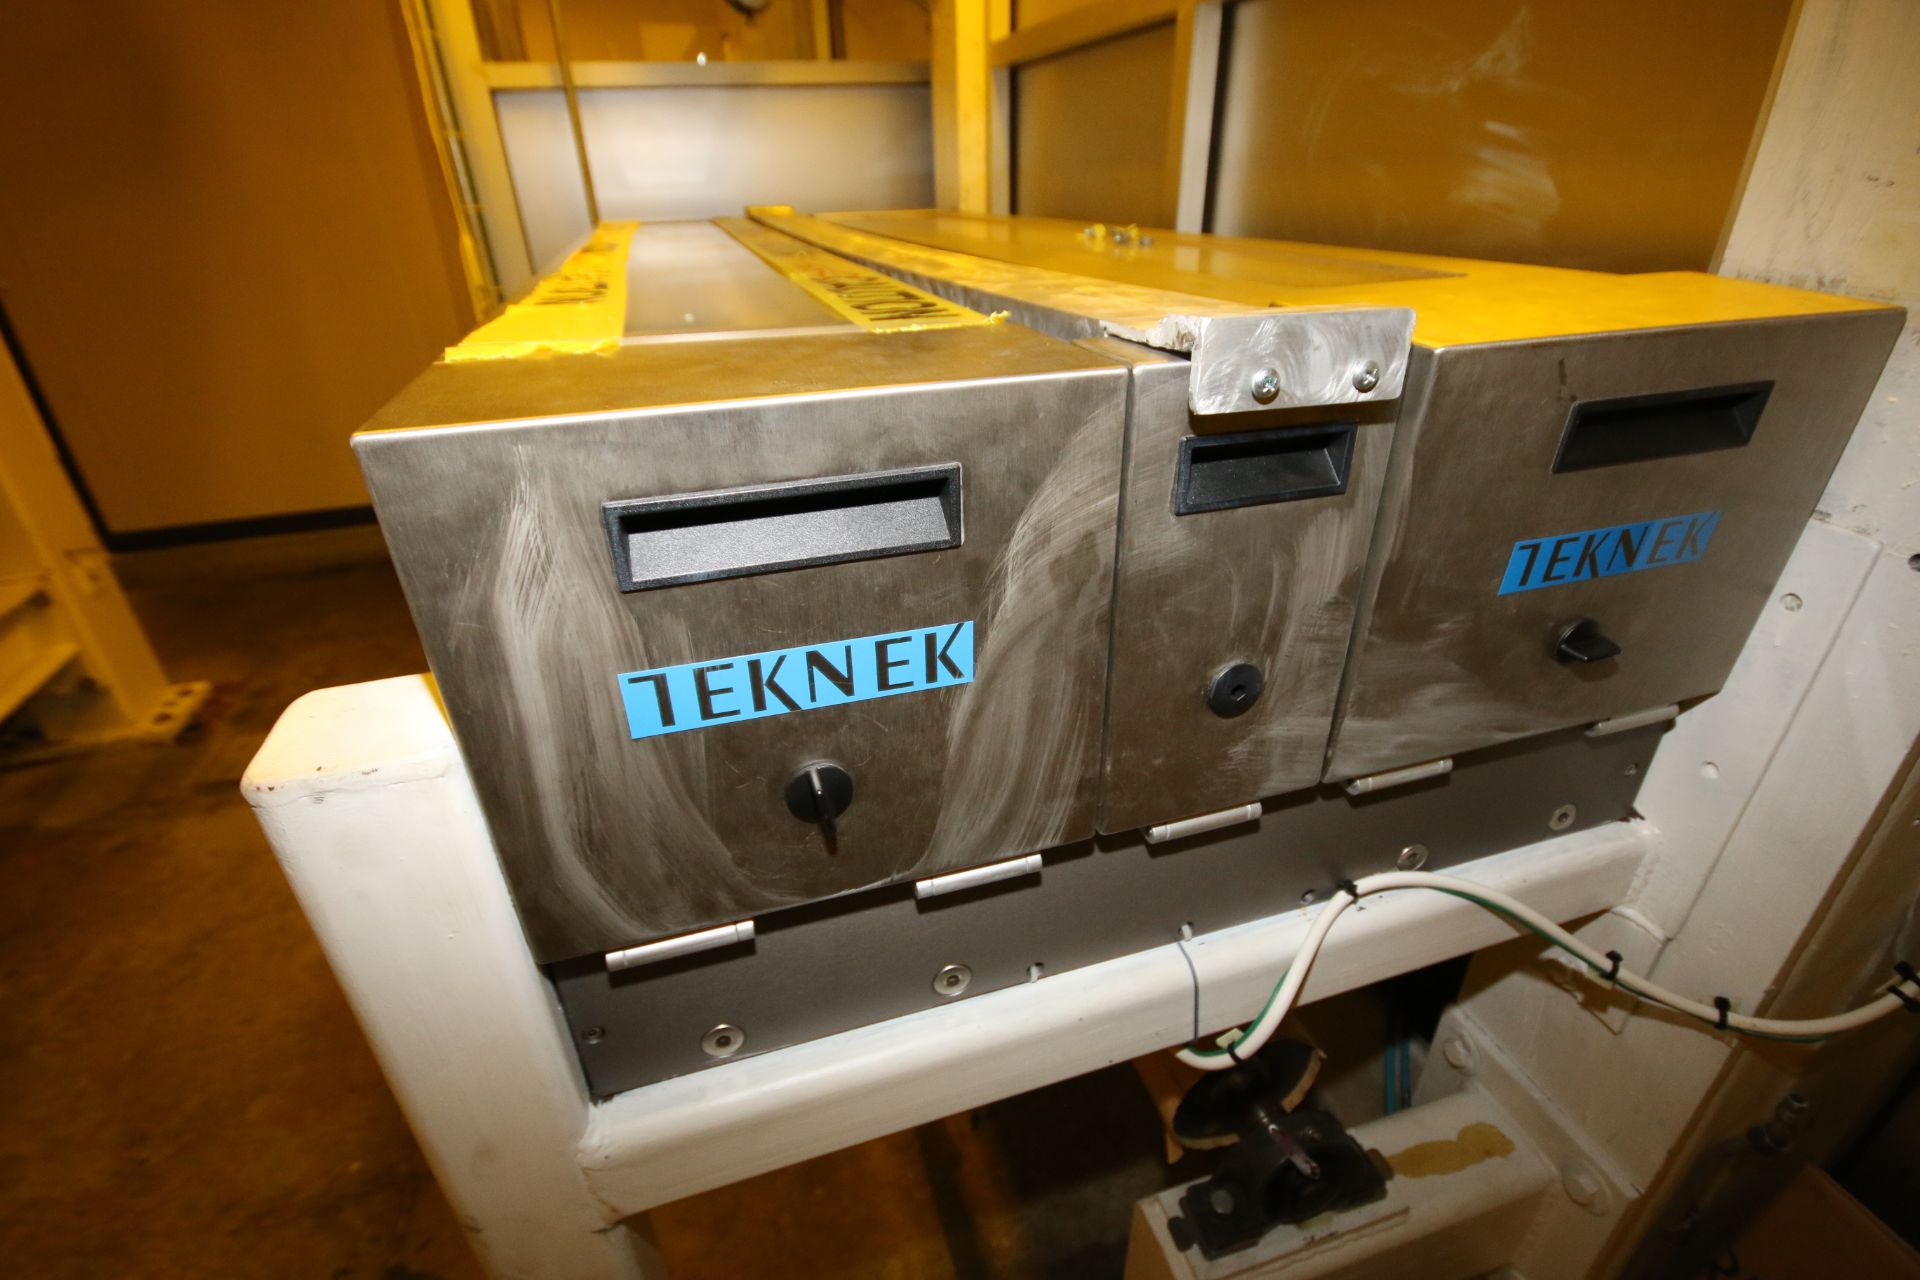 Teknek 63” W Film Cleaner Station with Control Panel Located Outside Room - Image 3 of 3